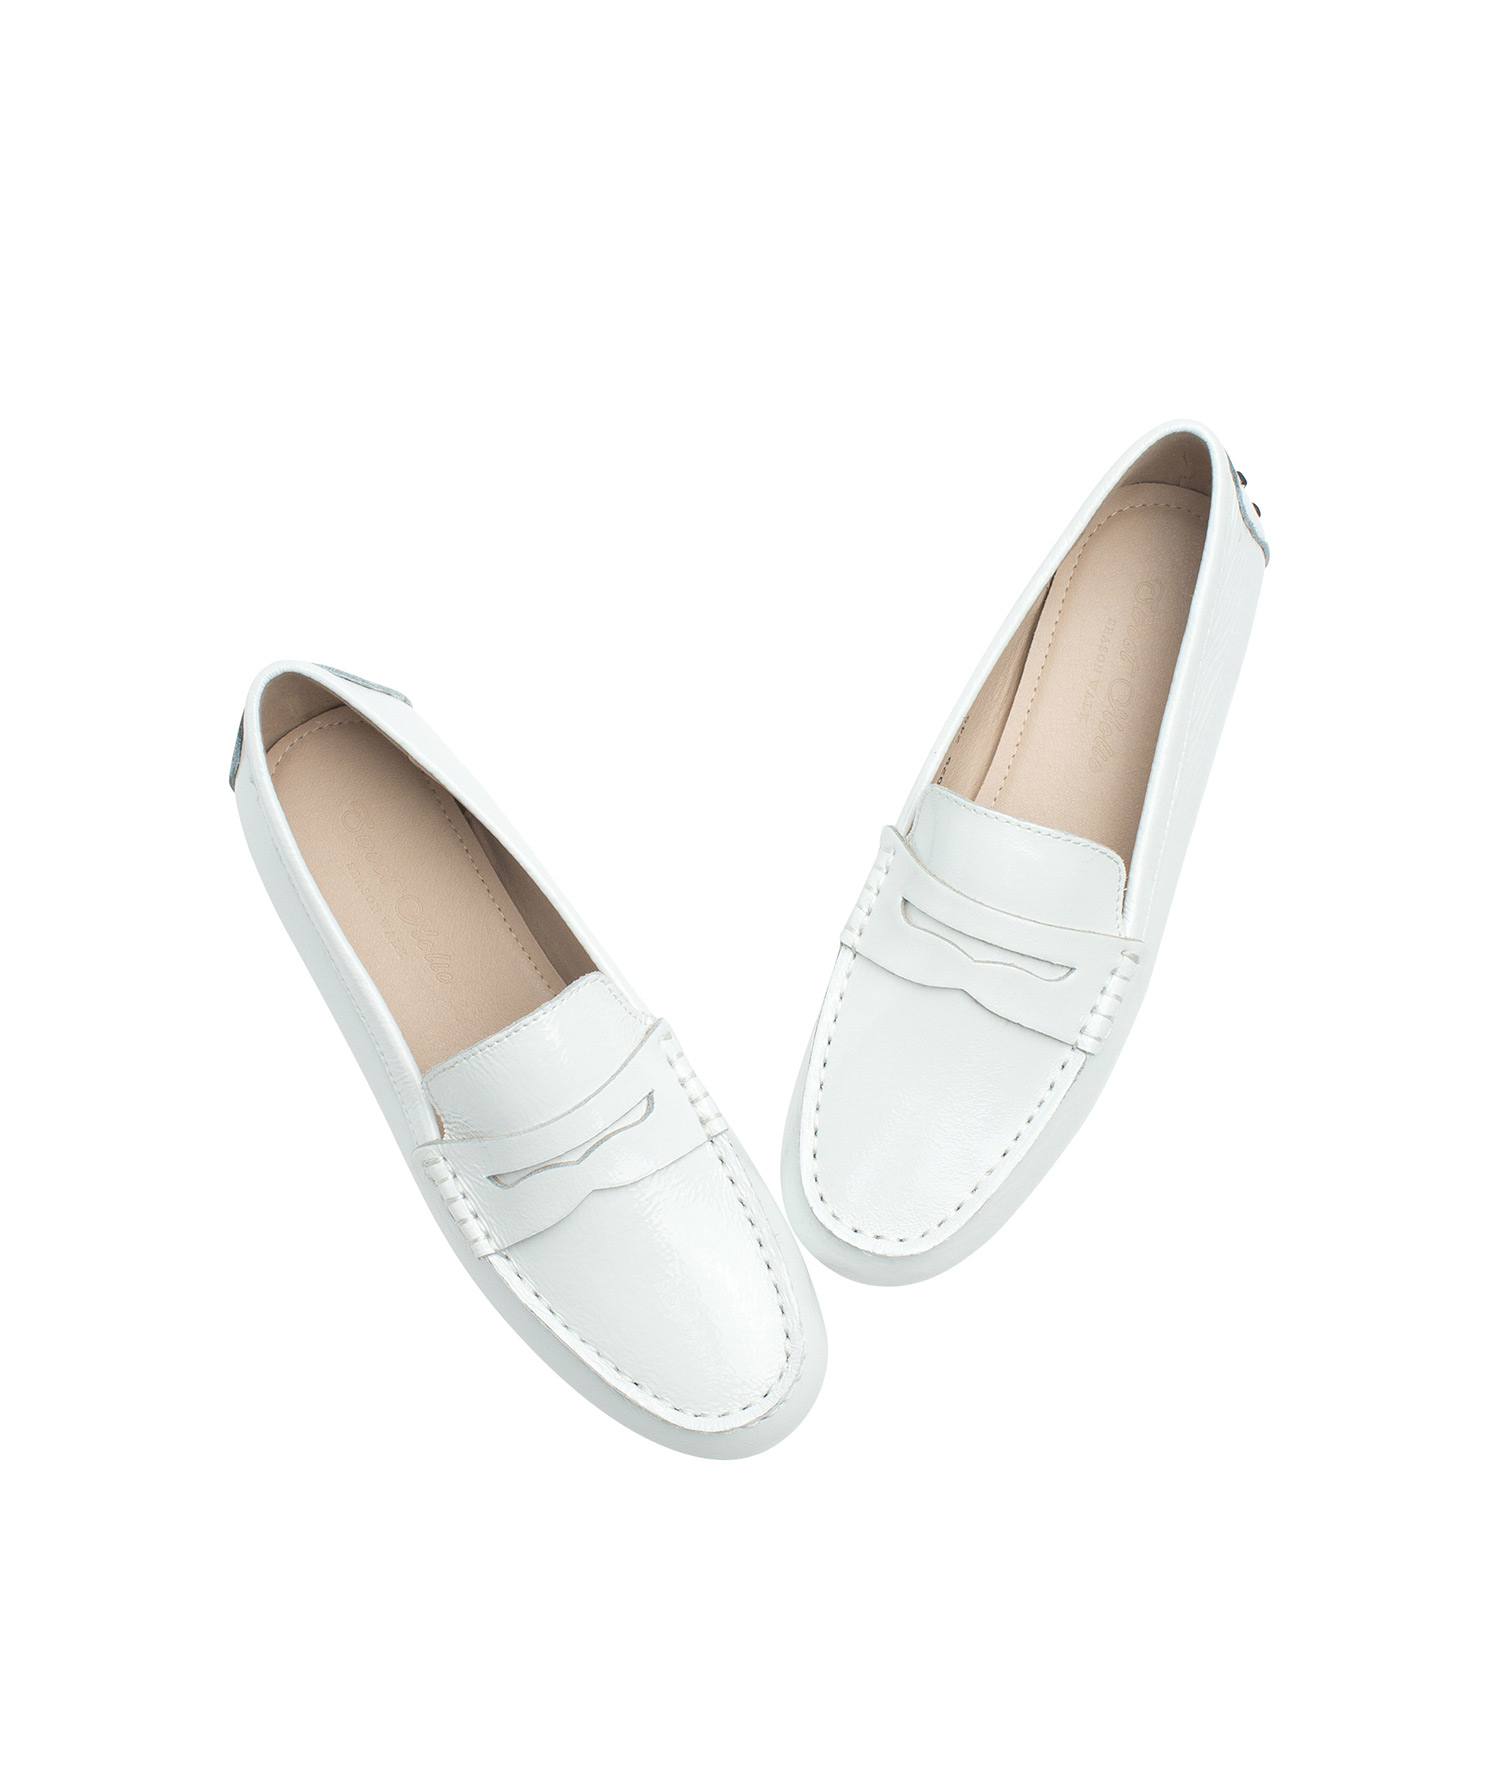 Patent Leather Penny Loafer Driving 